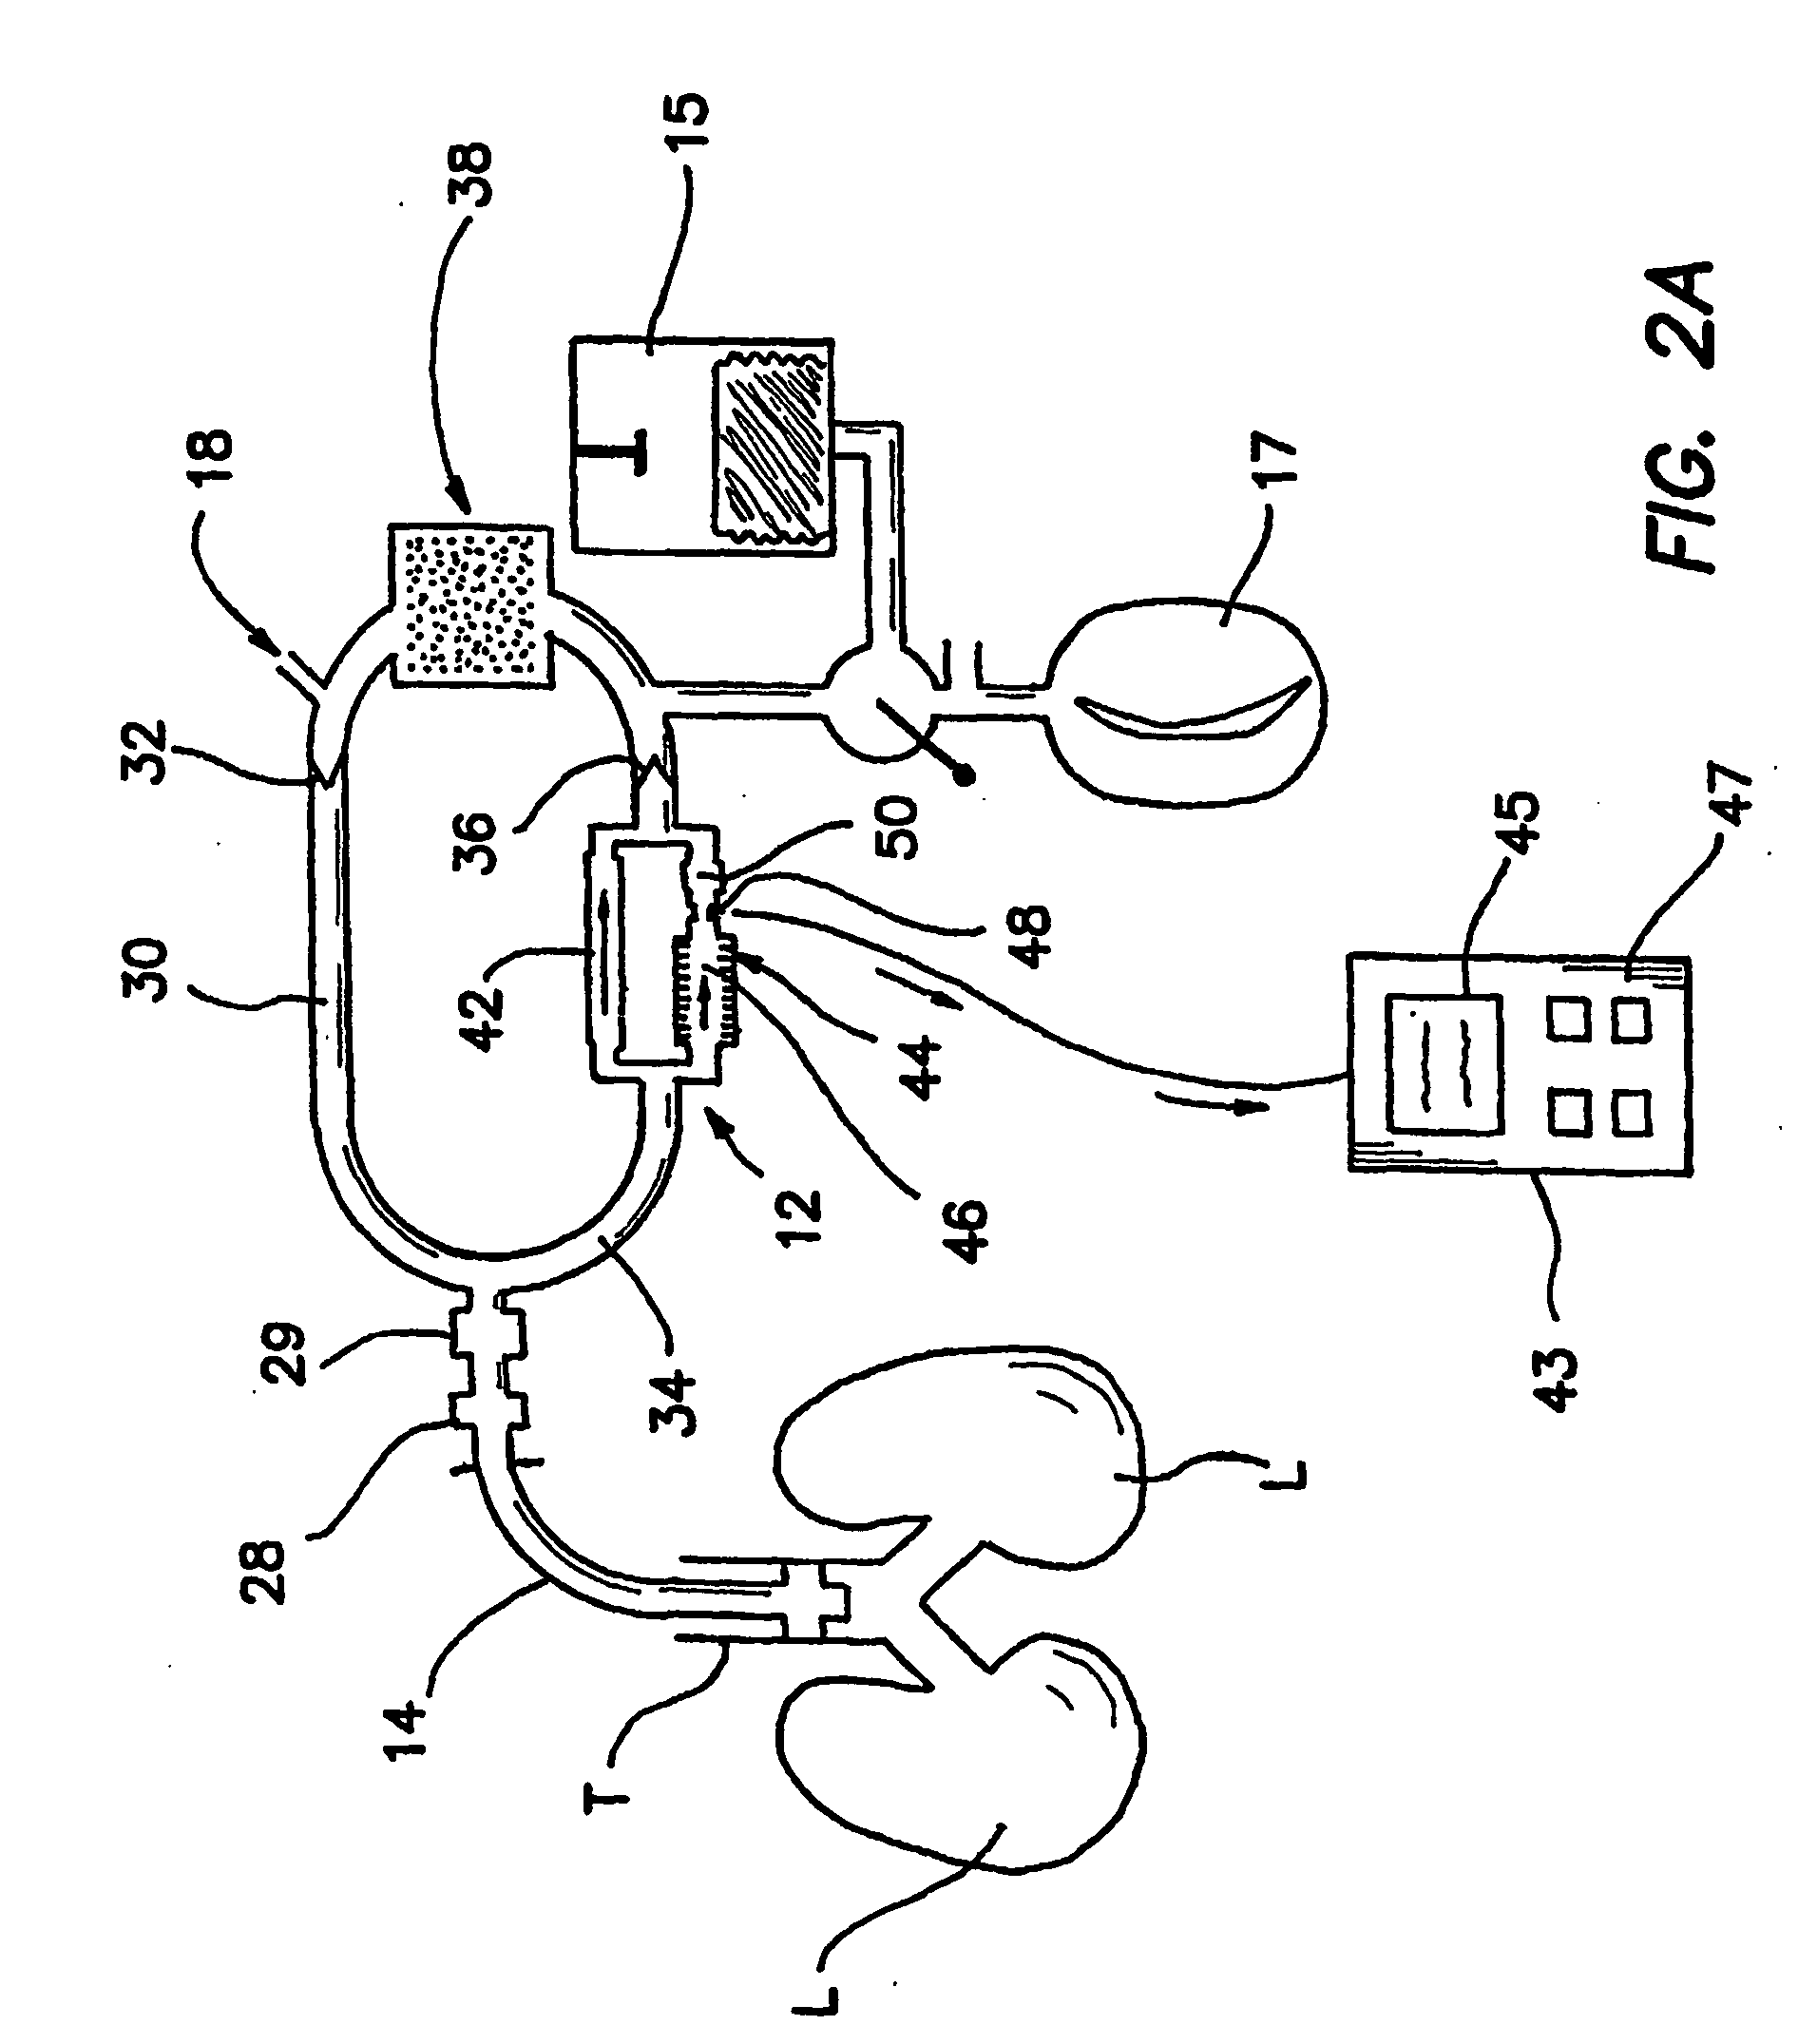 Bymixer apparatus and method for fast-response, adjustable measurement of mixed gas fractions in ventilation circuits